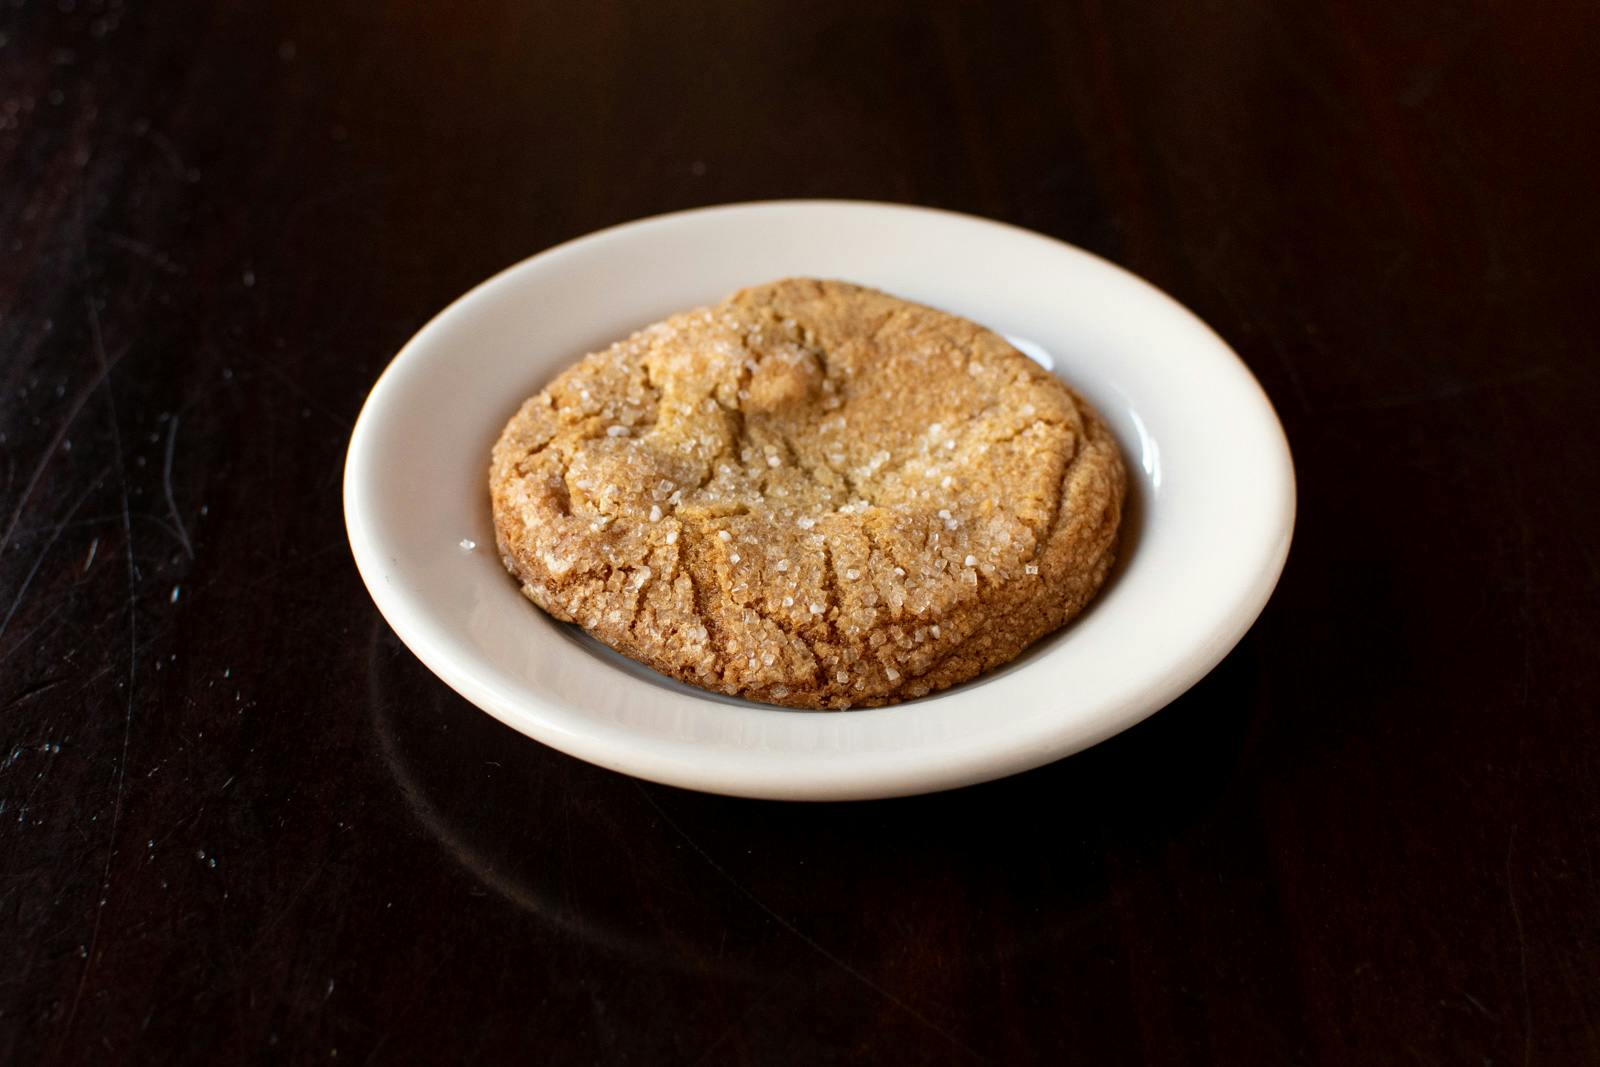 Toffee and White Chocolate Salted Caramel Cookie from Midcoast Wings - Downtown Madison in Madison, WI